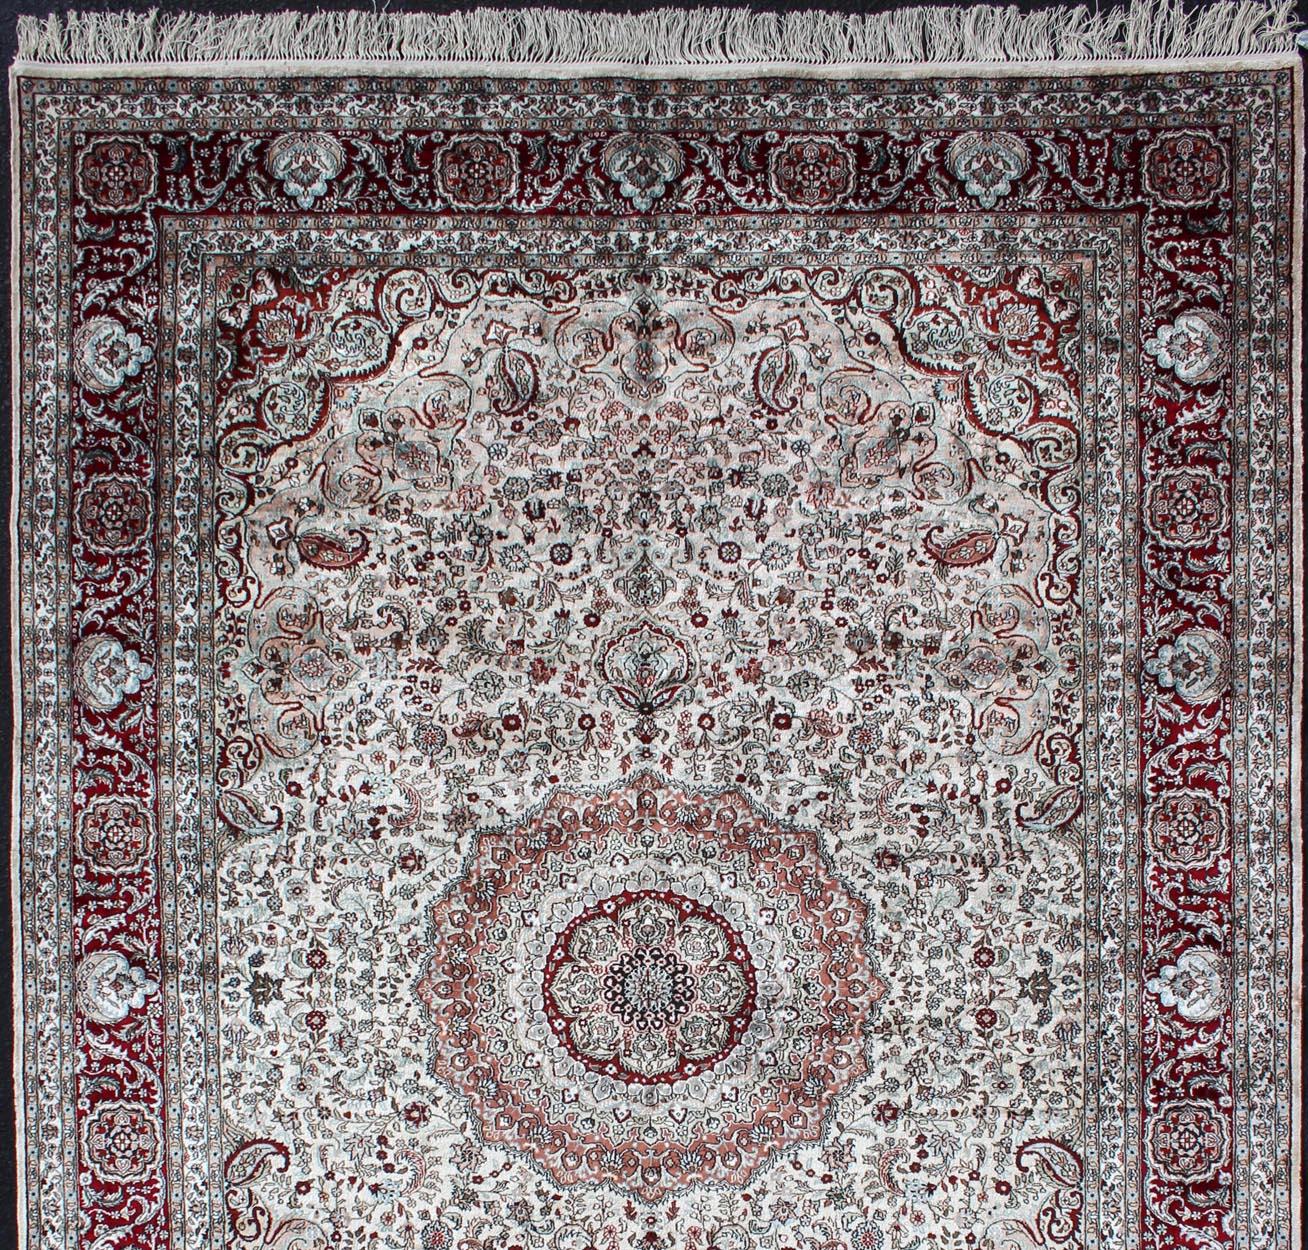 Persian design vintage Isfahan very fine hand knotted carpet with intricate and detailed floral elements, rug EB-200599-45, country of origin / type/ Isfahan, circa 1960

This outstanding vintage Isfahan design carpet is primarily characterized by